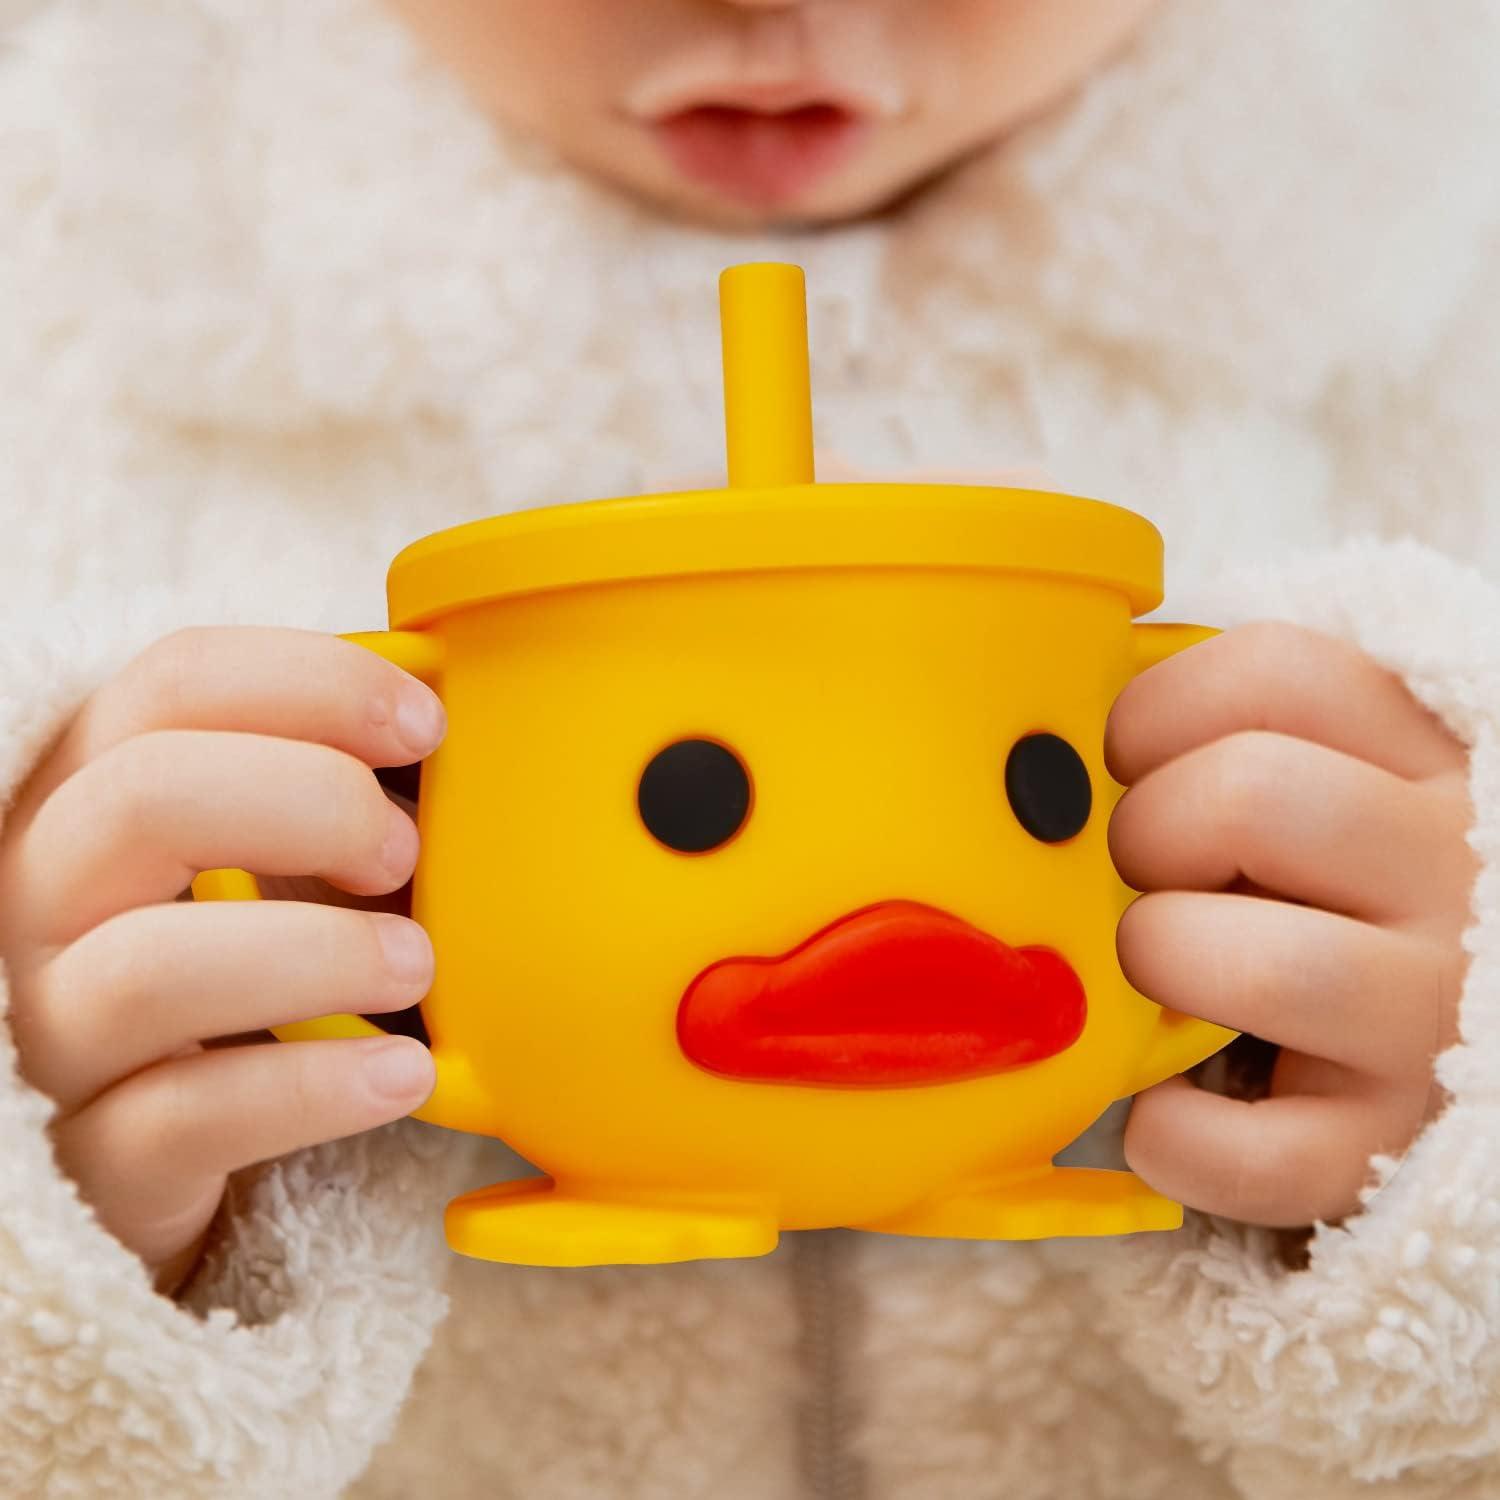  KIDSco. Silicone Sippy Cup and Training Cup for Baby 6